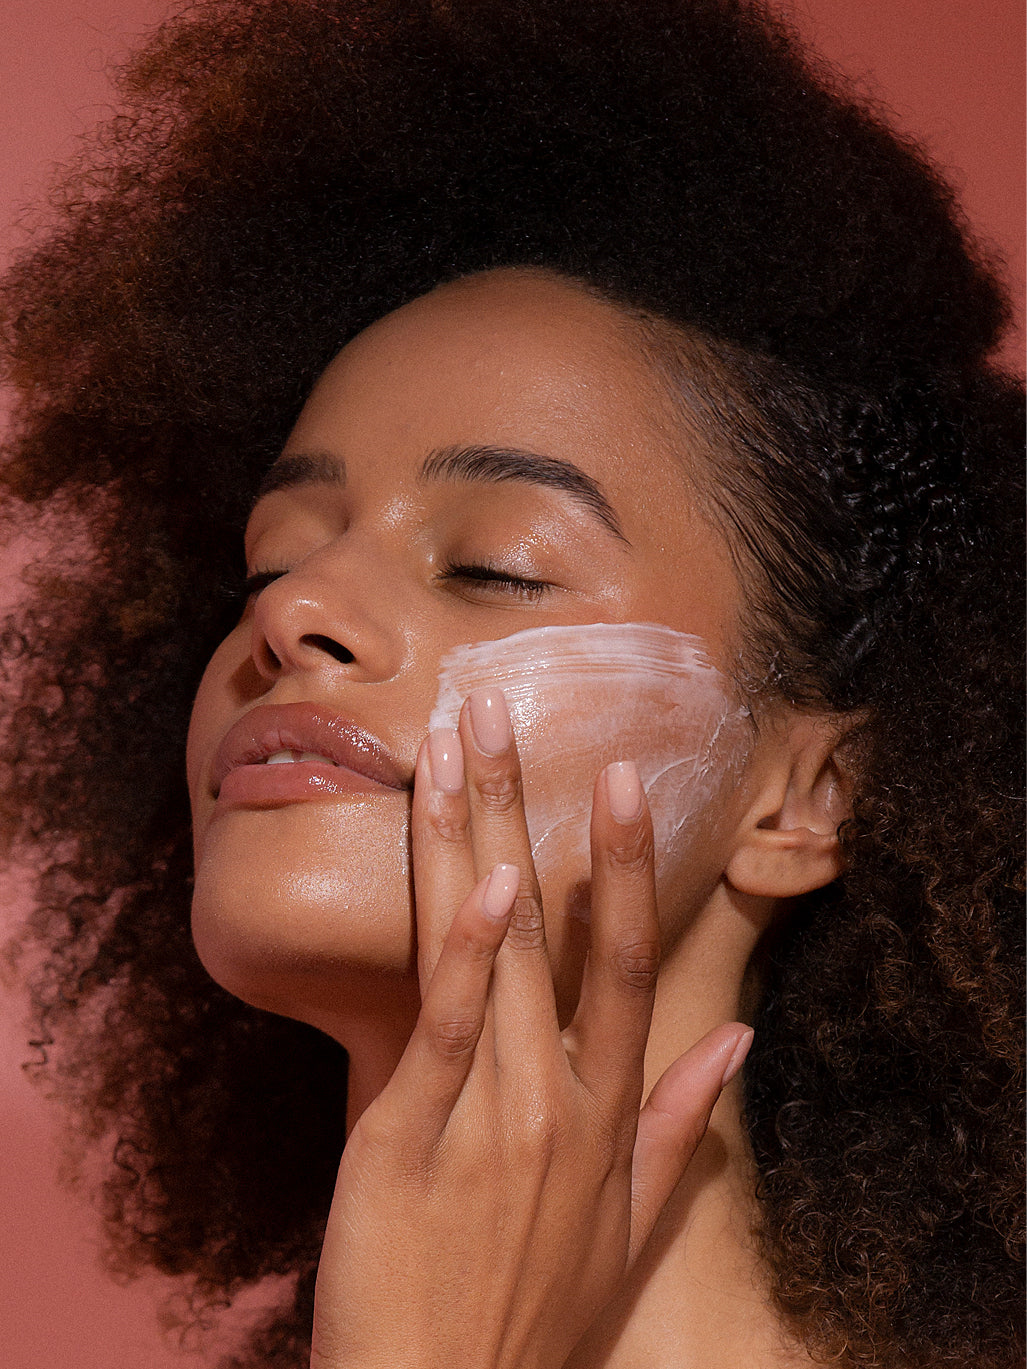 THE IMPORTANCE OF A NIGHTLY SKIN RESET